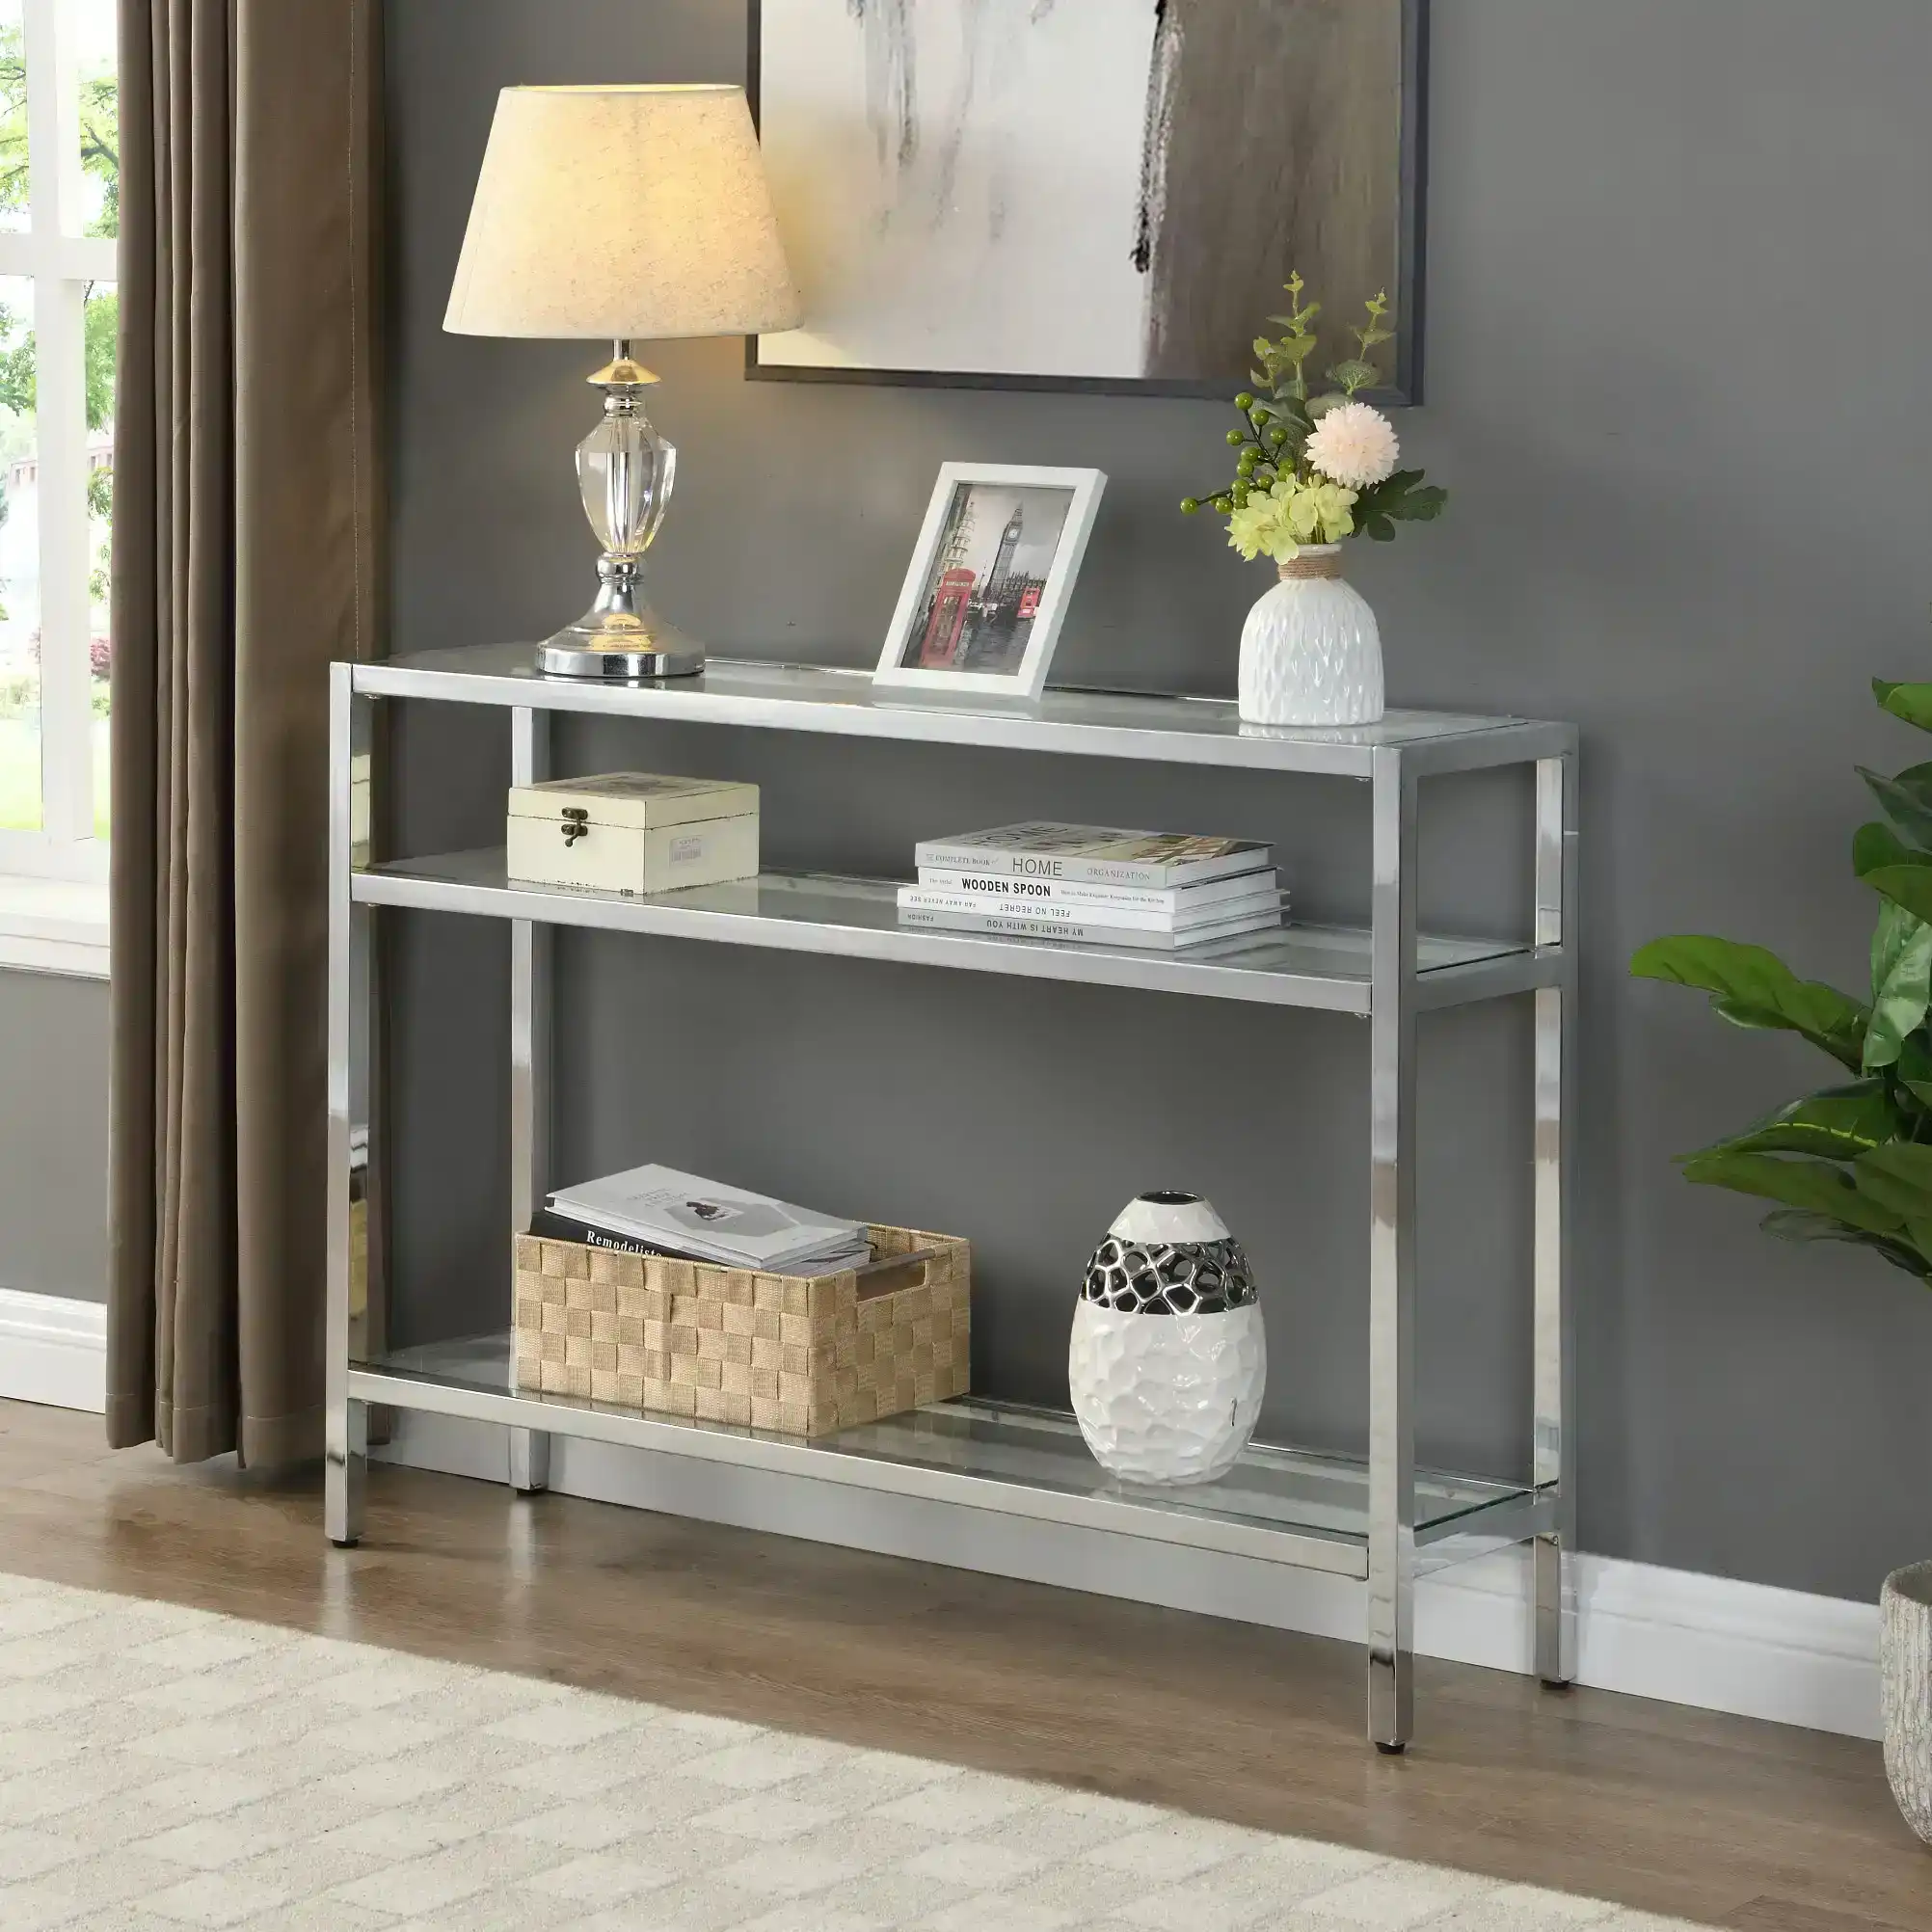 HLIVING Modern Glass Console Table, Entryway Table with 3 Tiers Storage Shelves, Chrome Finish